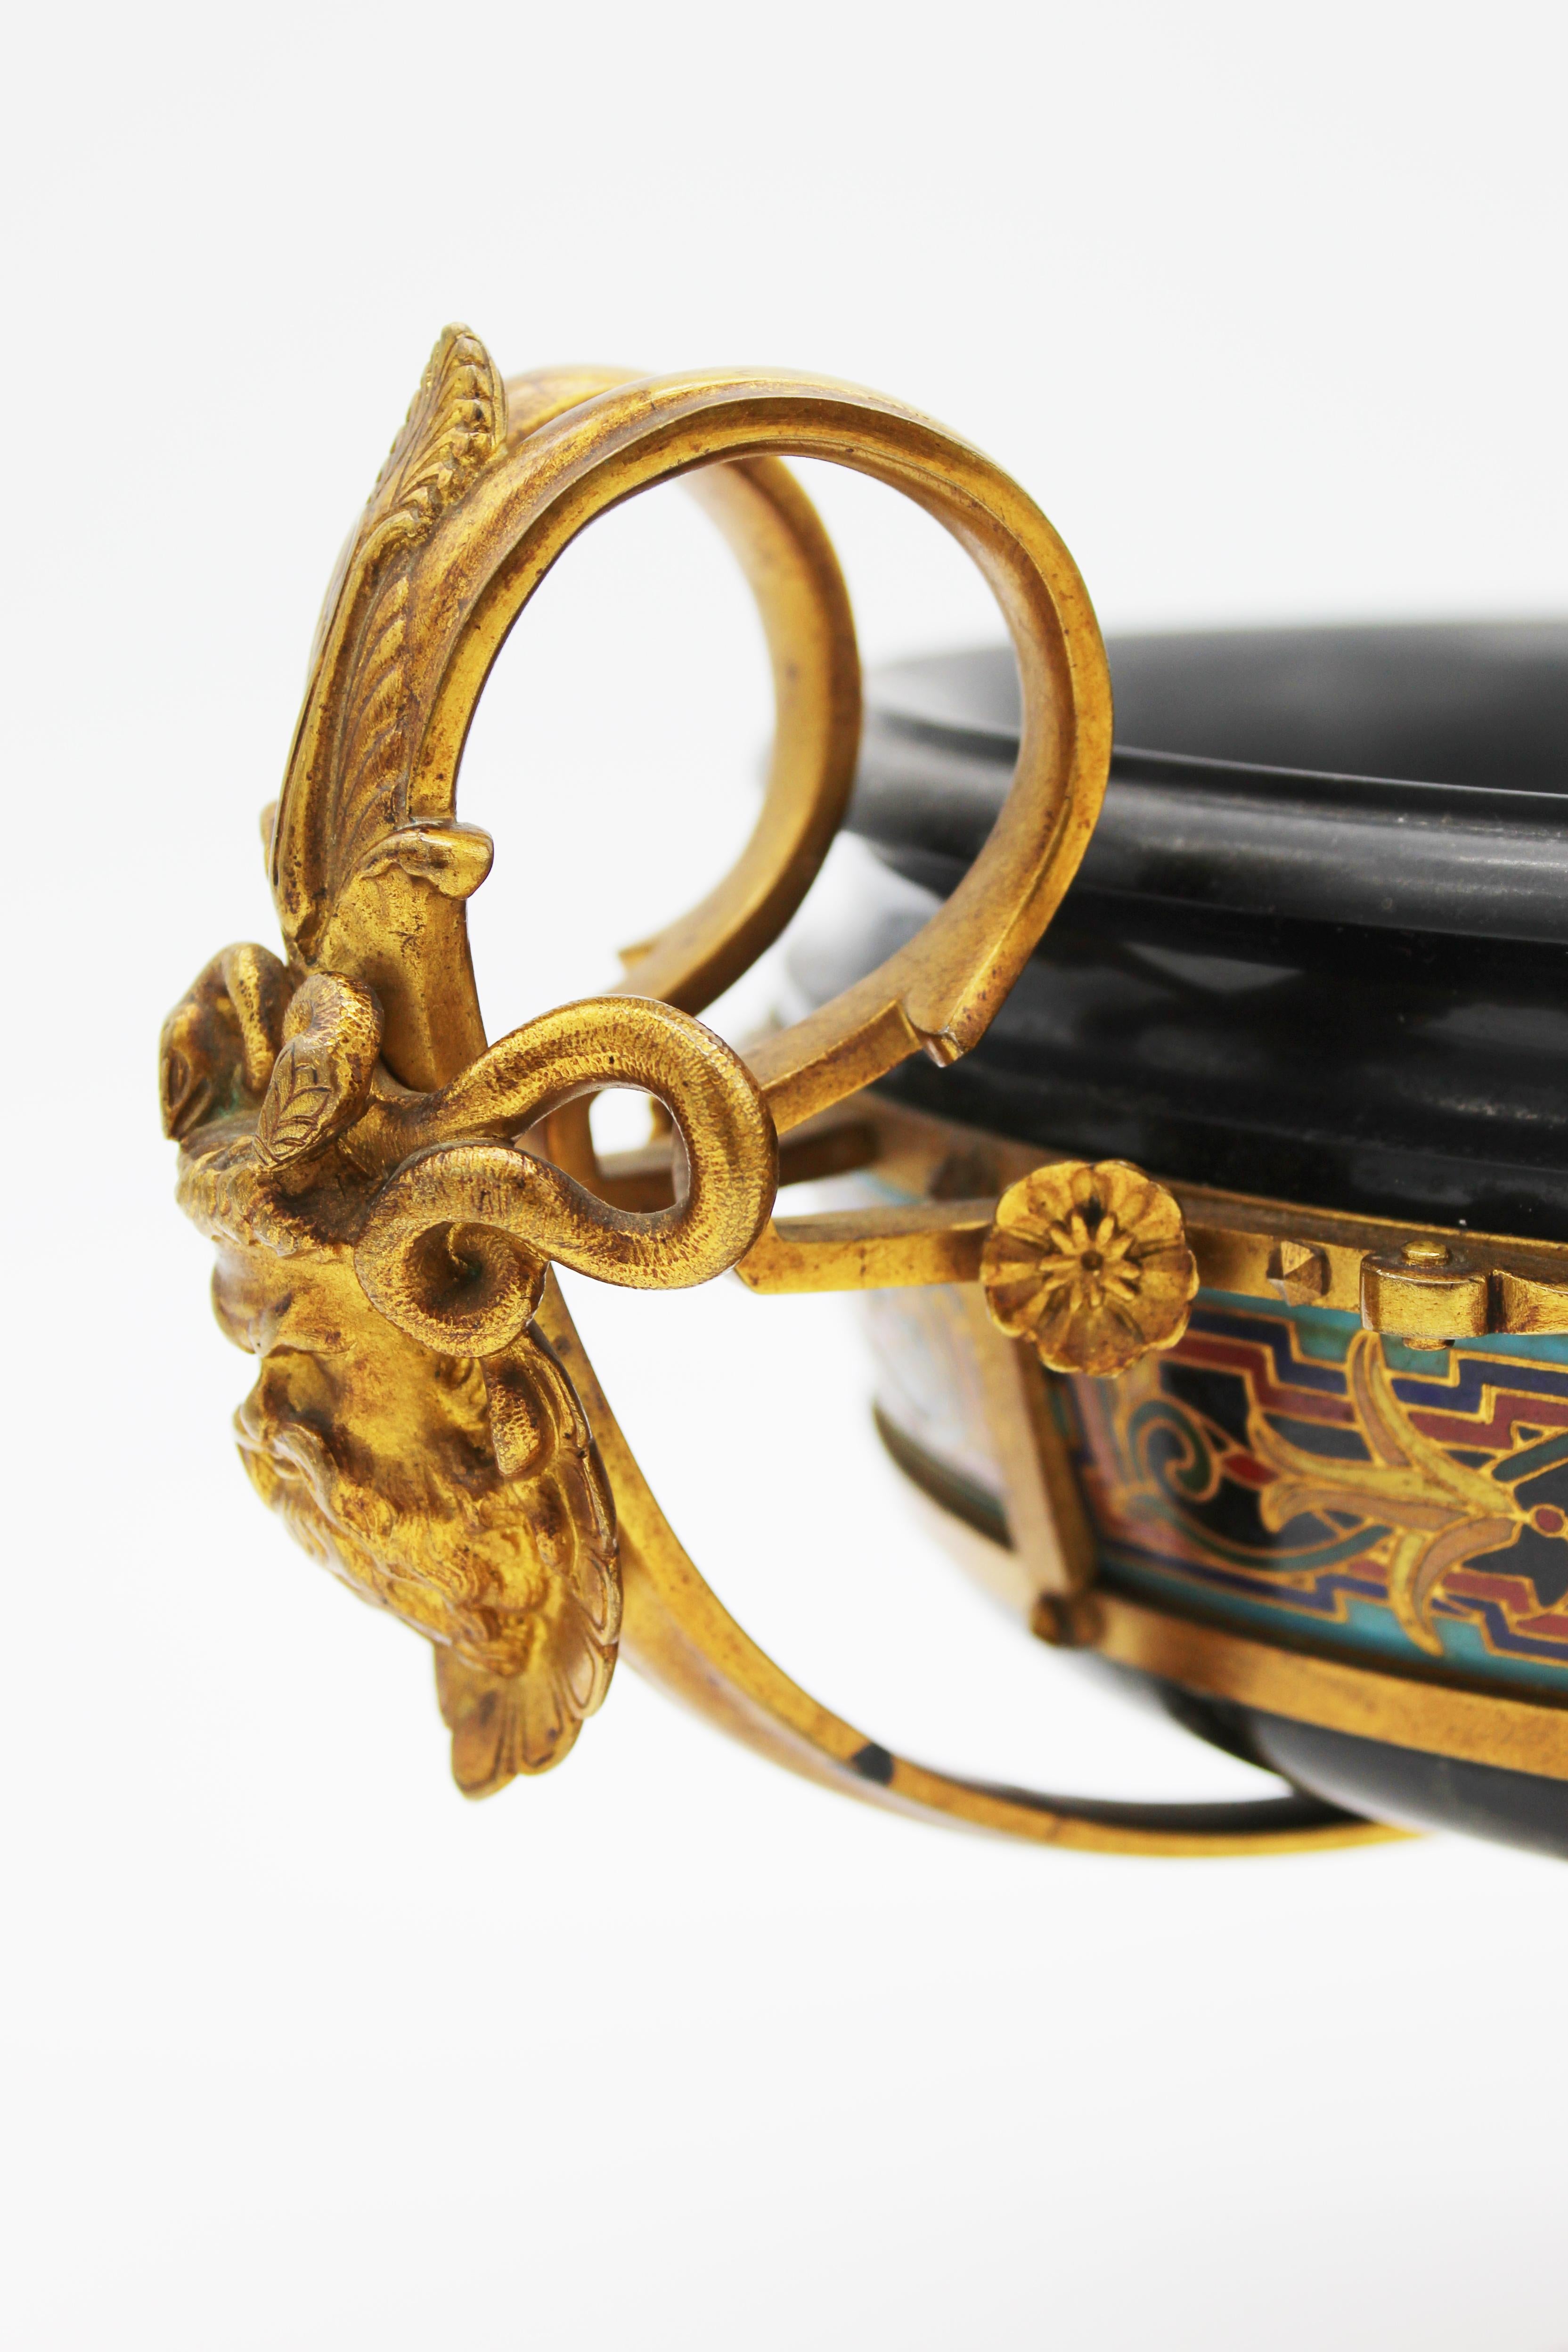 Gold Bronze and Marble Tazza by Barbedienne Attributed to Louis Constant Sevine 1